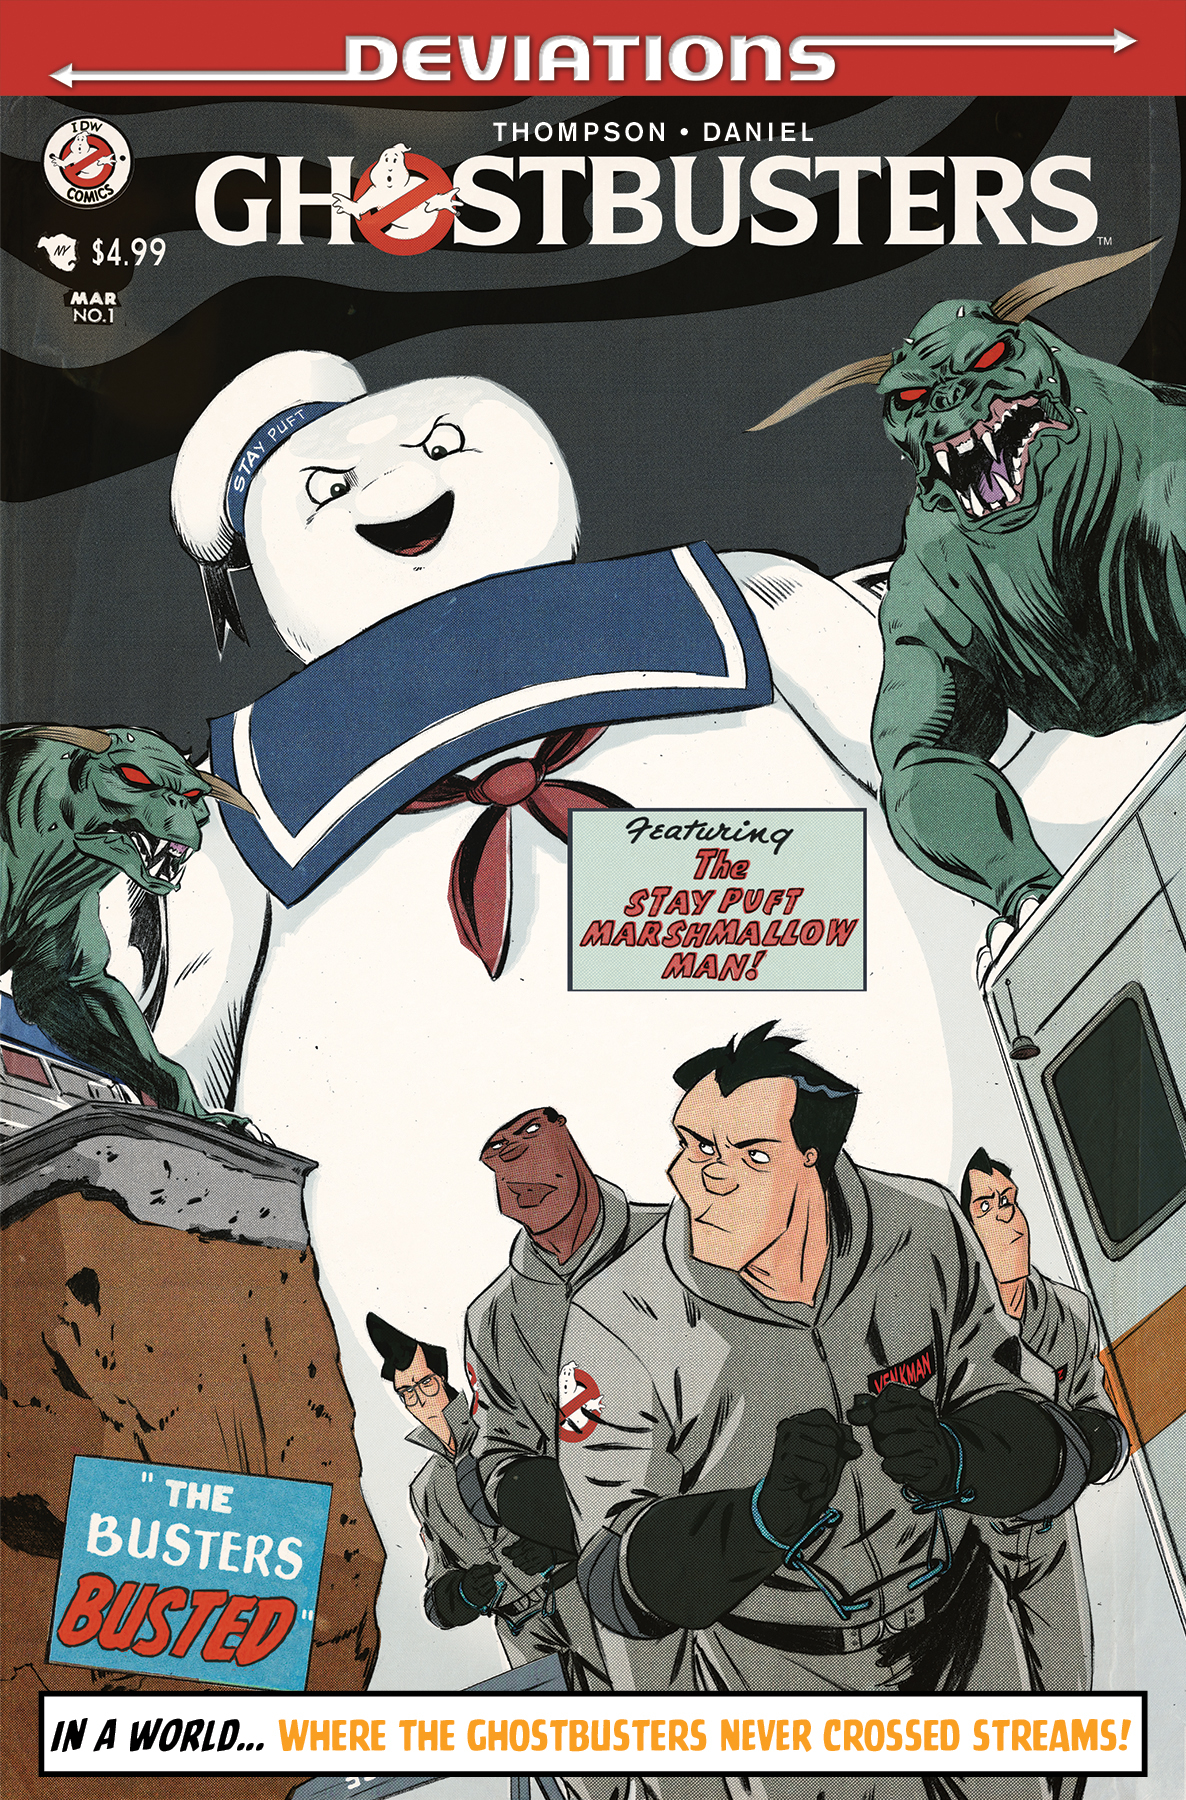 GHOSTBUSTERS DEVIATIONS SUBSCRIPTION VAR (ONE SHOT)